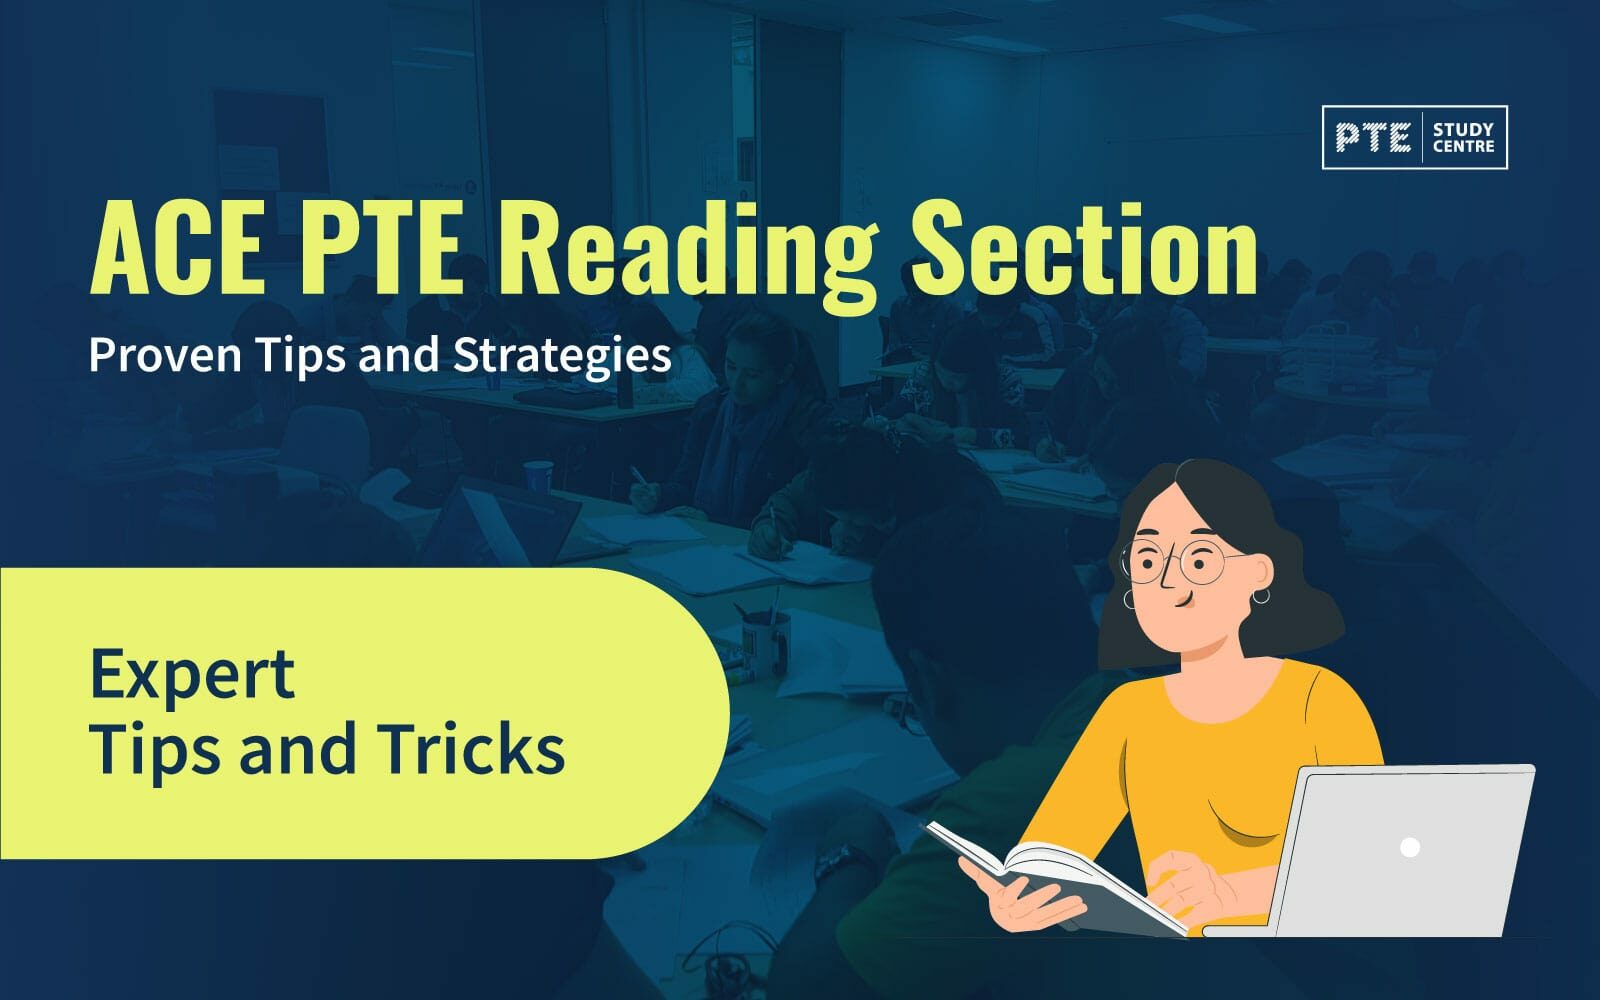 Ace PTE Reading Section: Proven Tips and Strategies